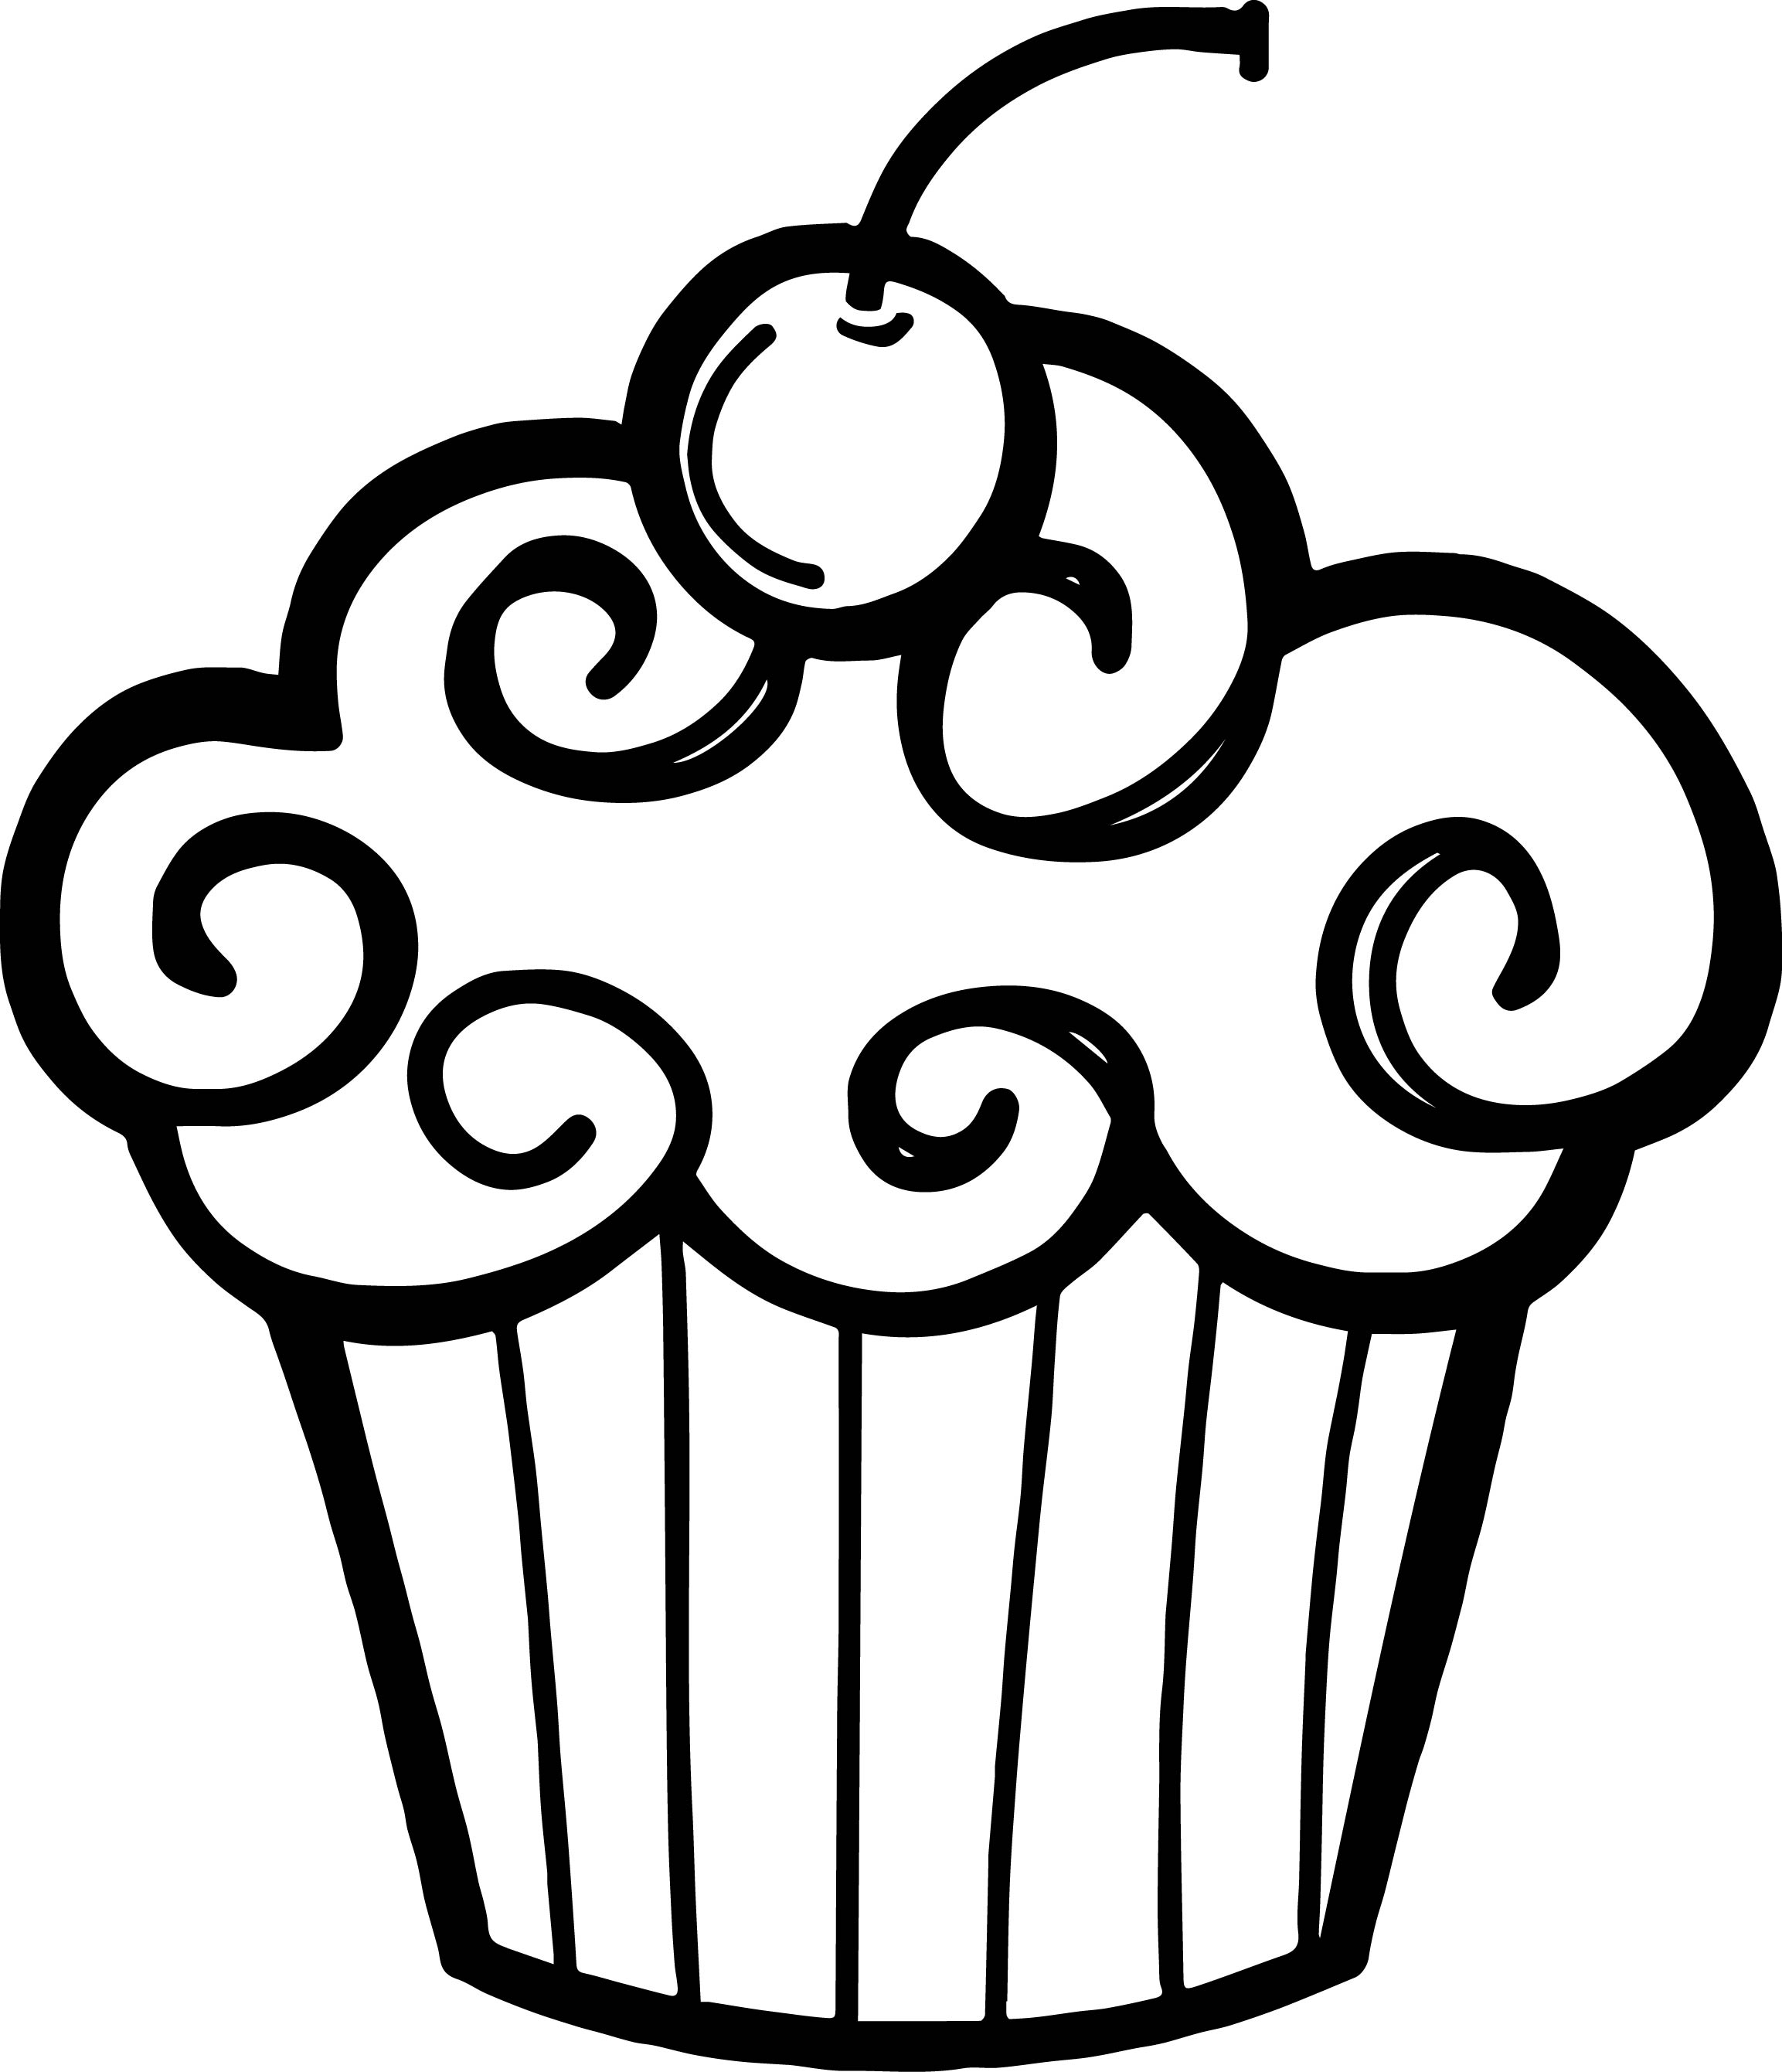 Cupcake clipart outline